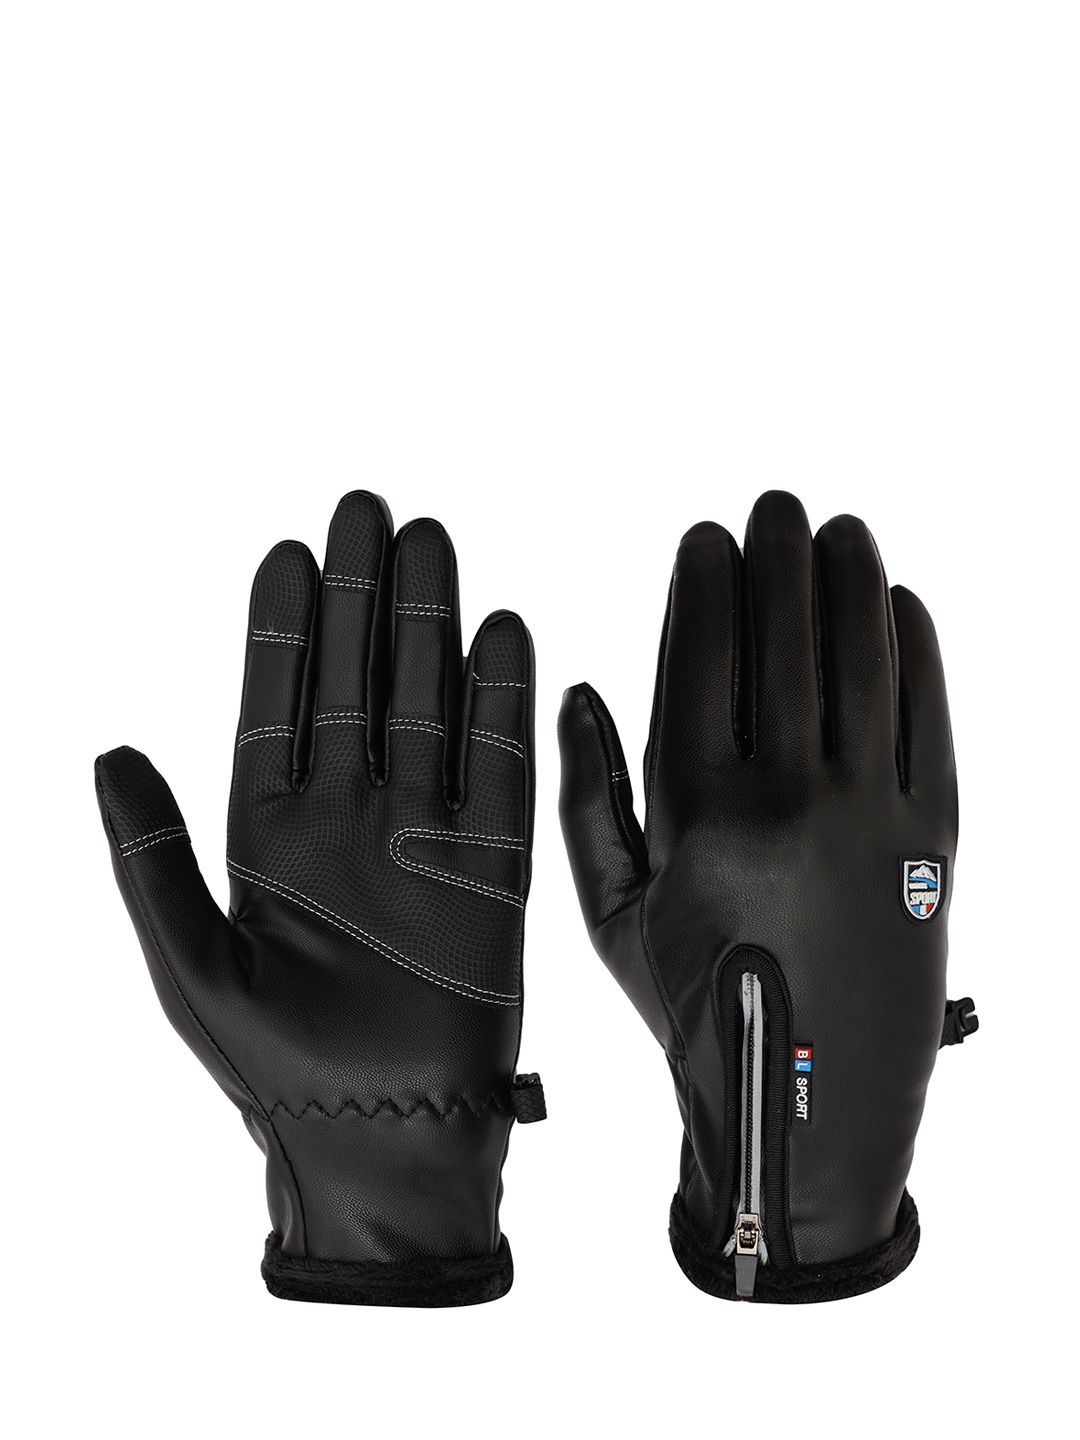 FabSeasons Unisex Black Patterned Gloves Price in India